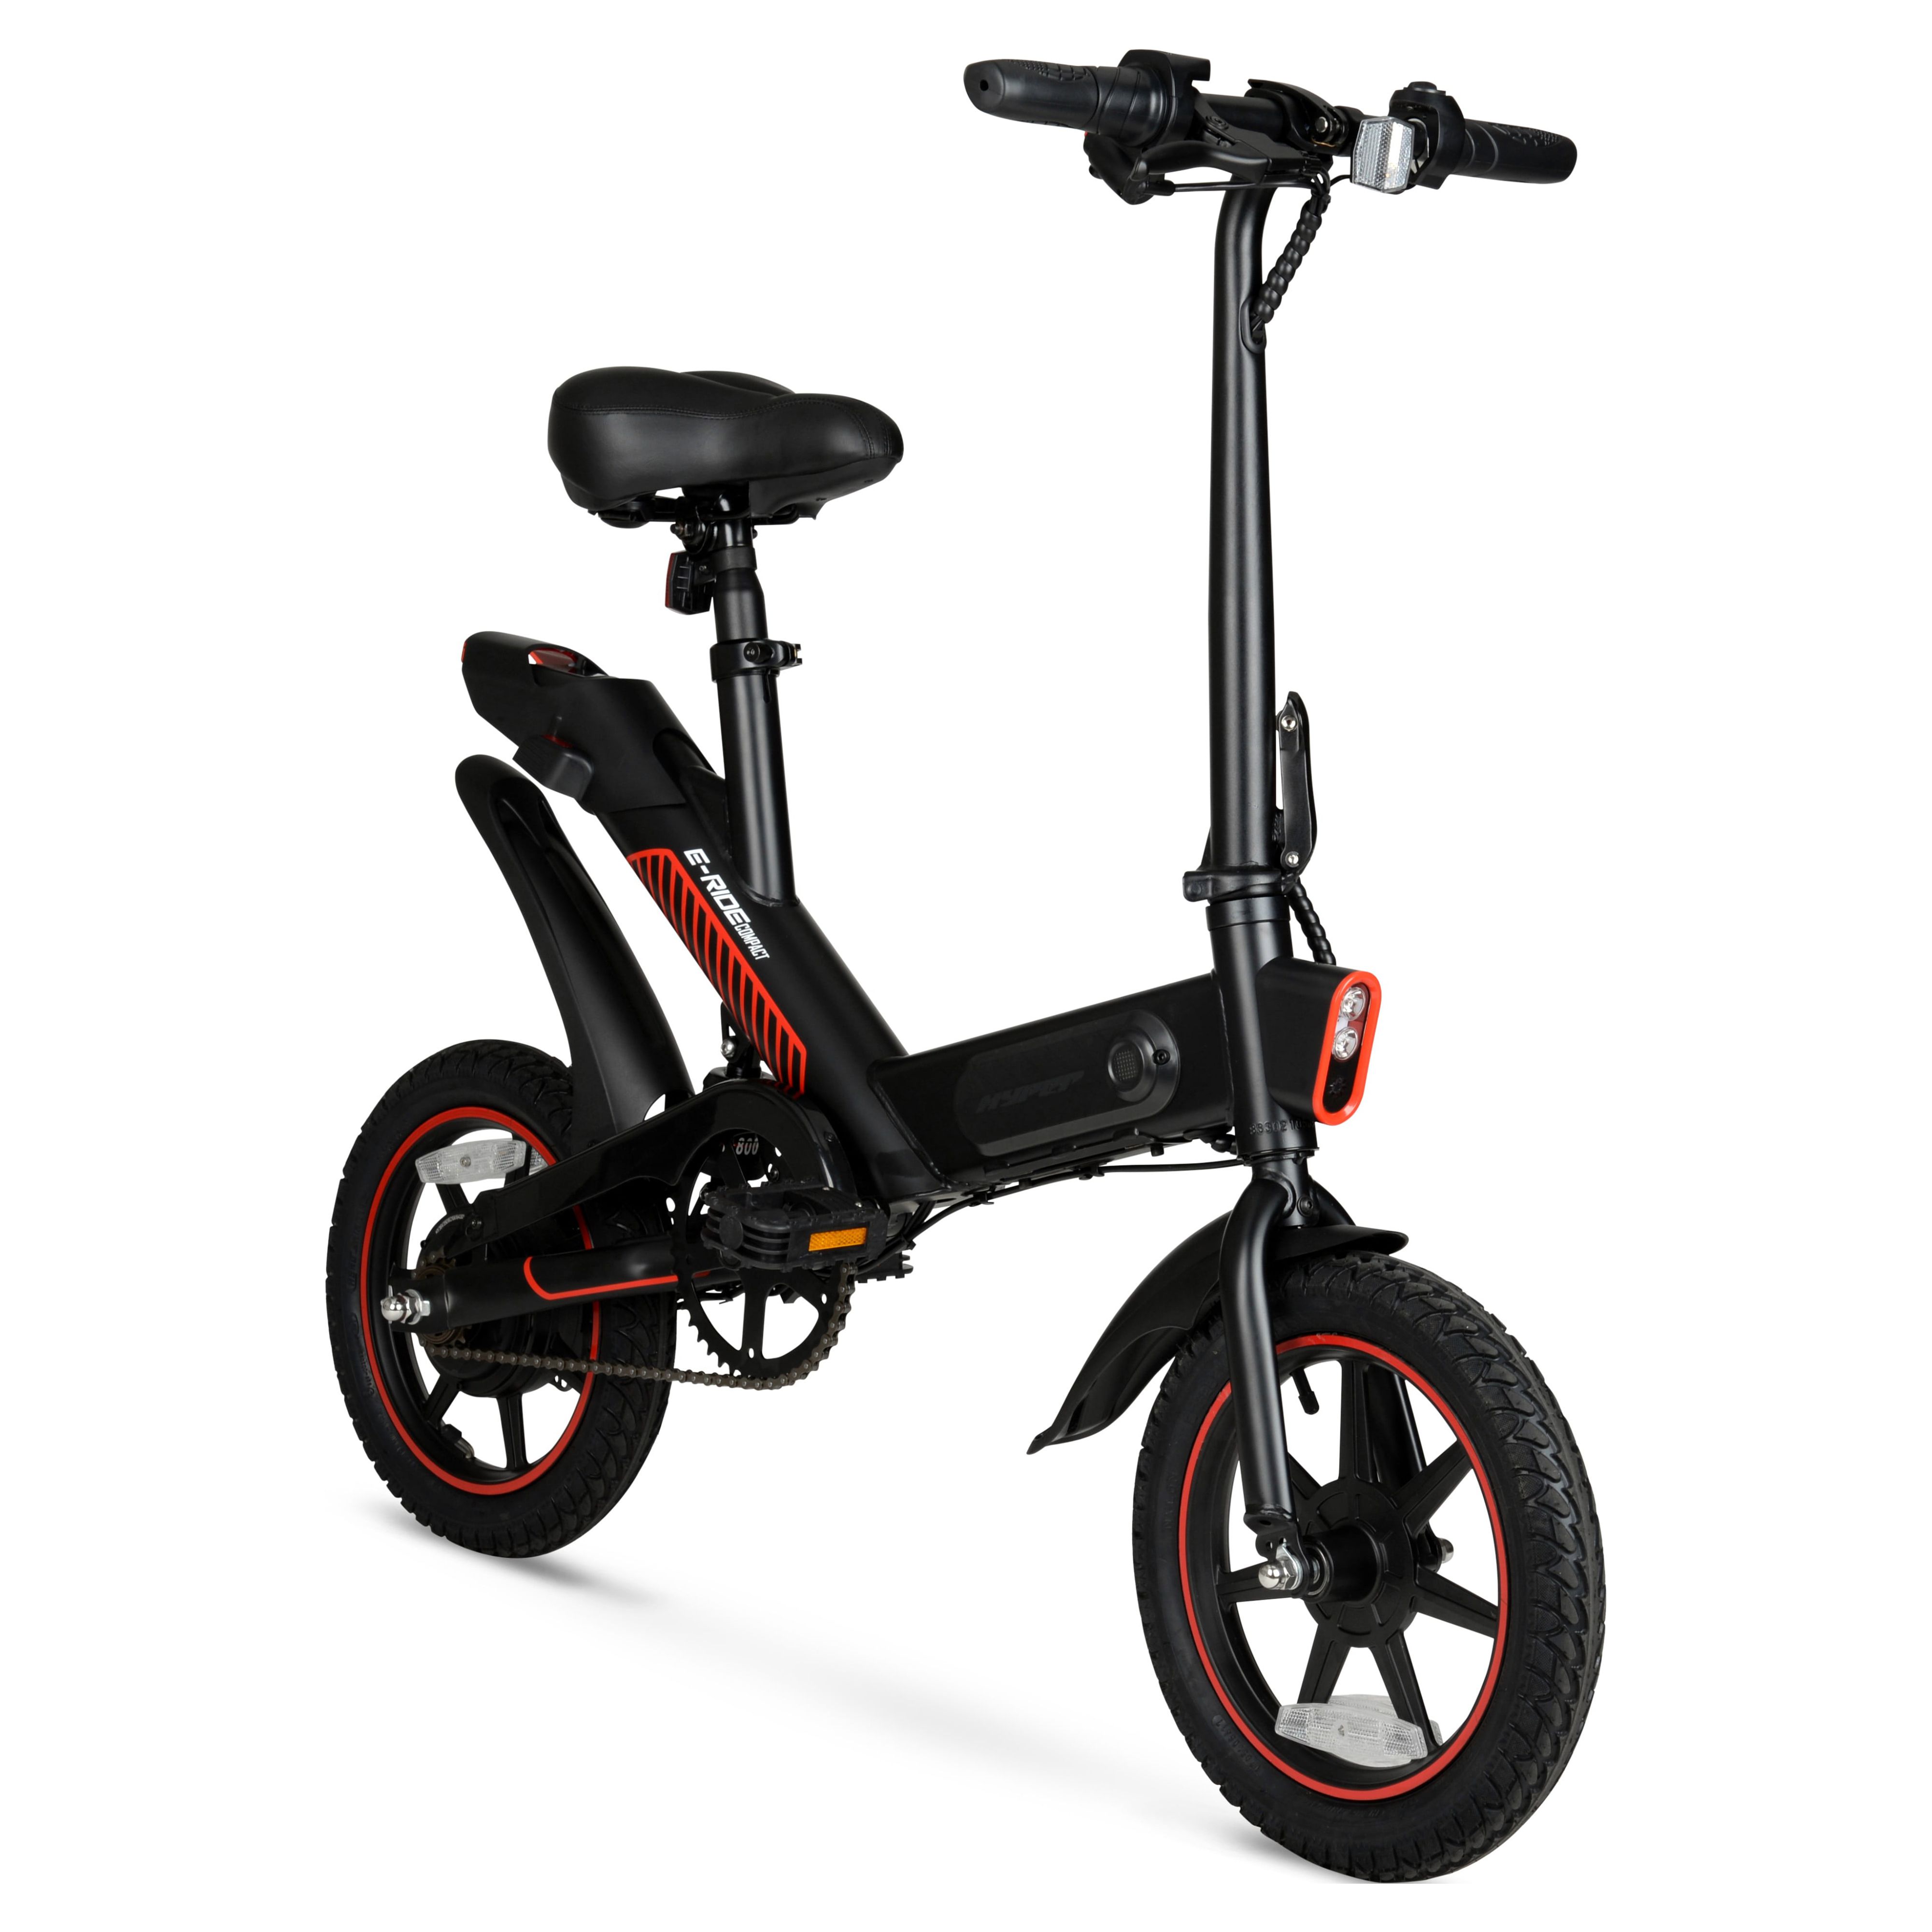 Hyper Bicycles 14" 36V Foldable Compact Electric Bike w/Throttle, 350W Motor, Recommended Ages 14 years and up - image 1 of 20